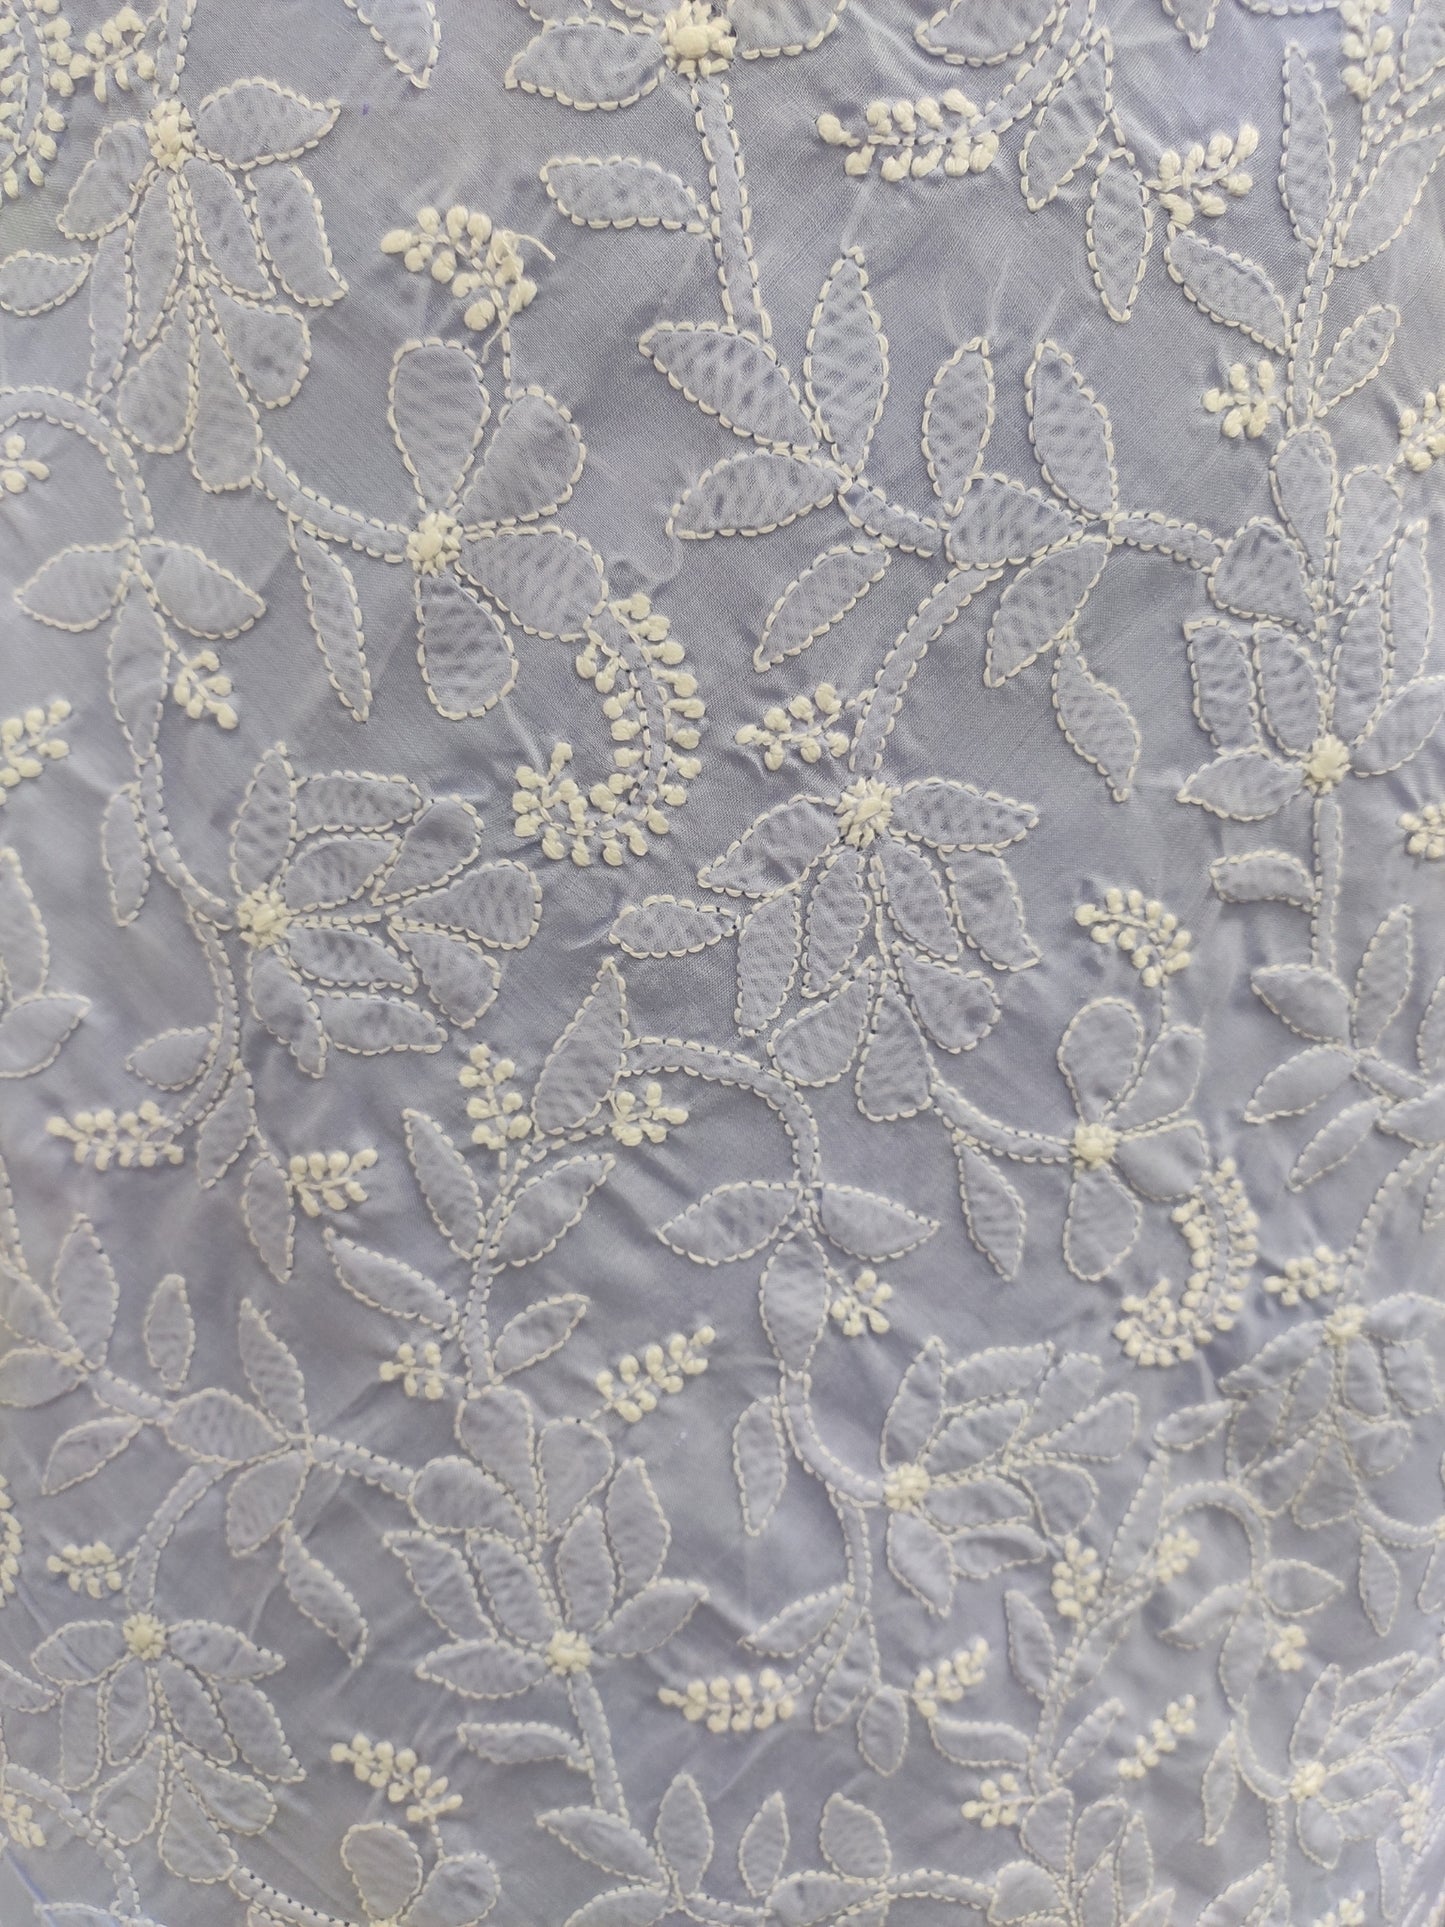 Shyamal Chikan Hand Embroidered Lavender Cotton Lucknowi Chikankari Heavy Palla Saree With Blouse Piece- S22536